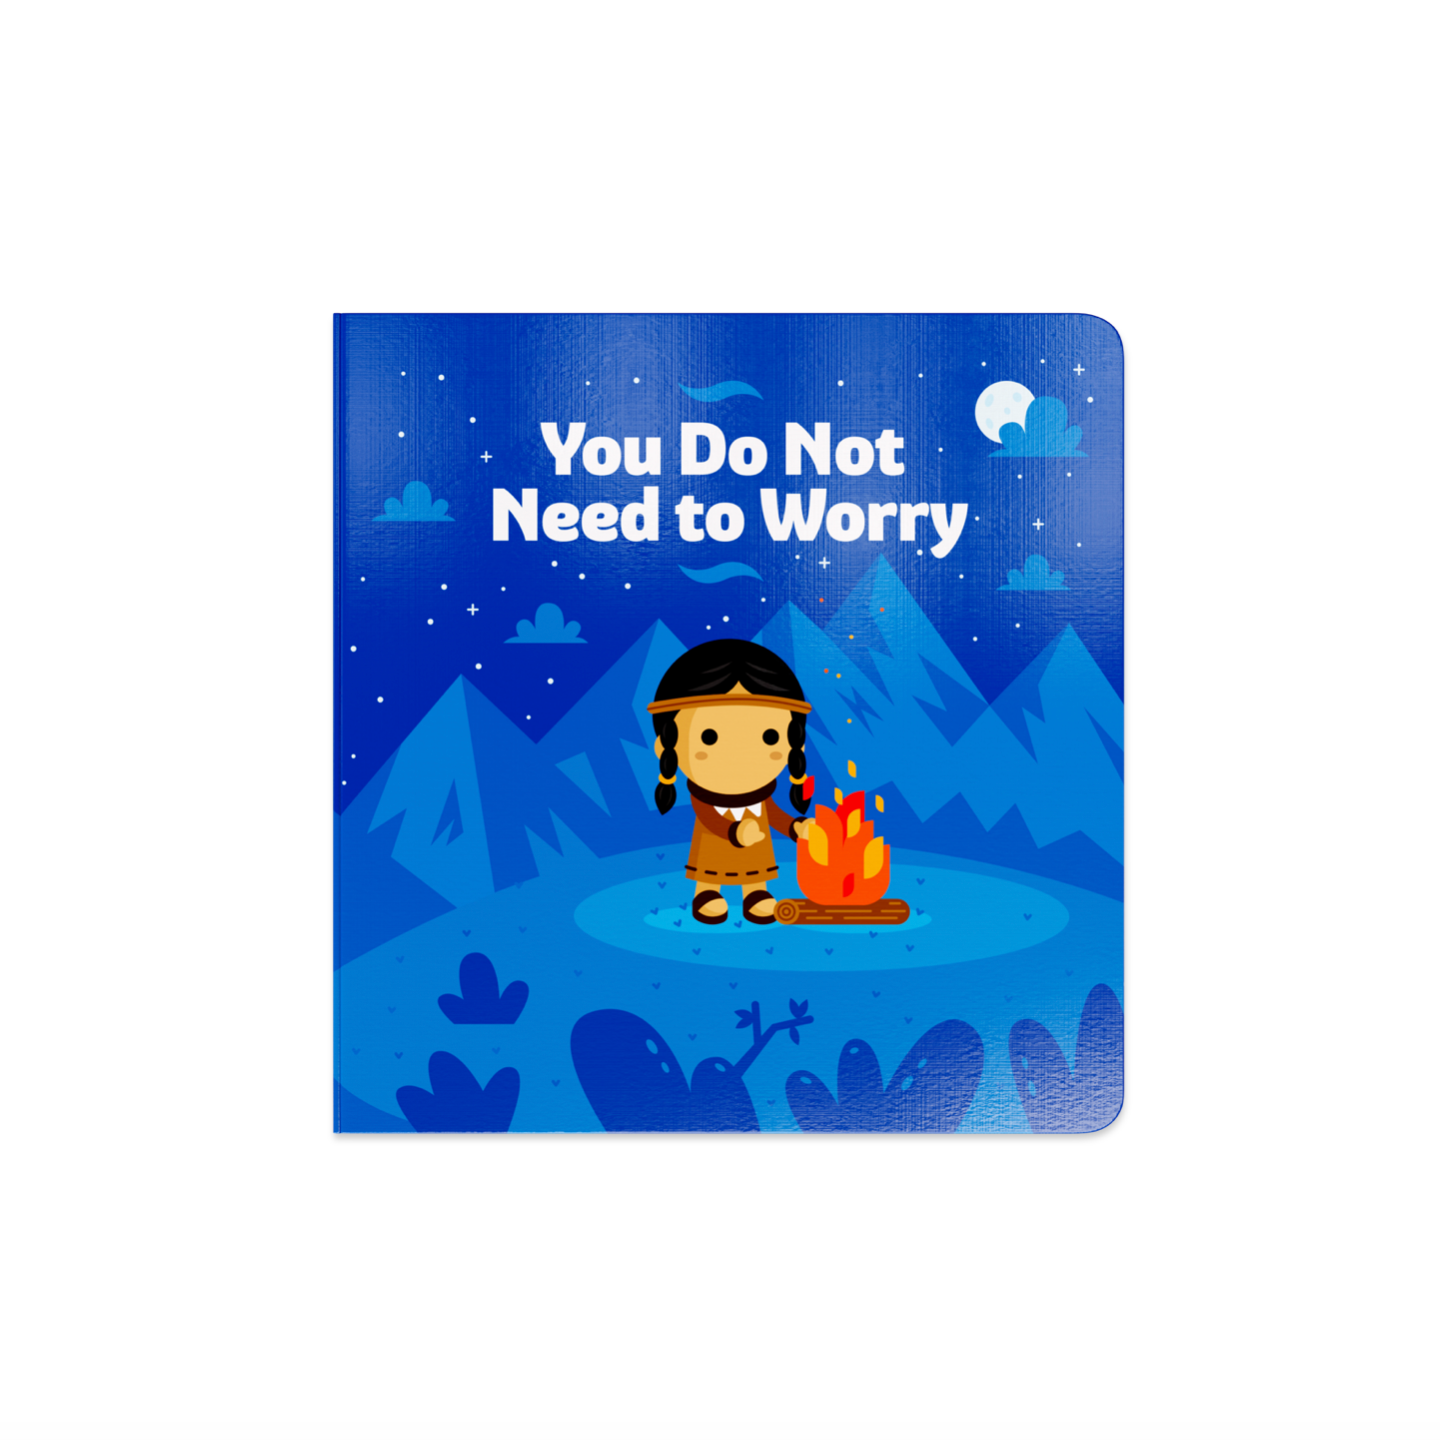 Board Book - "You Do Not Need to Worry"